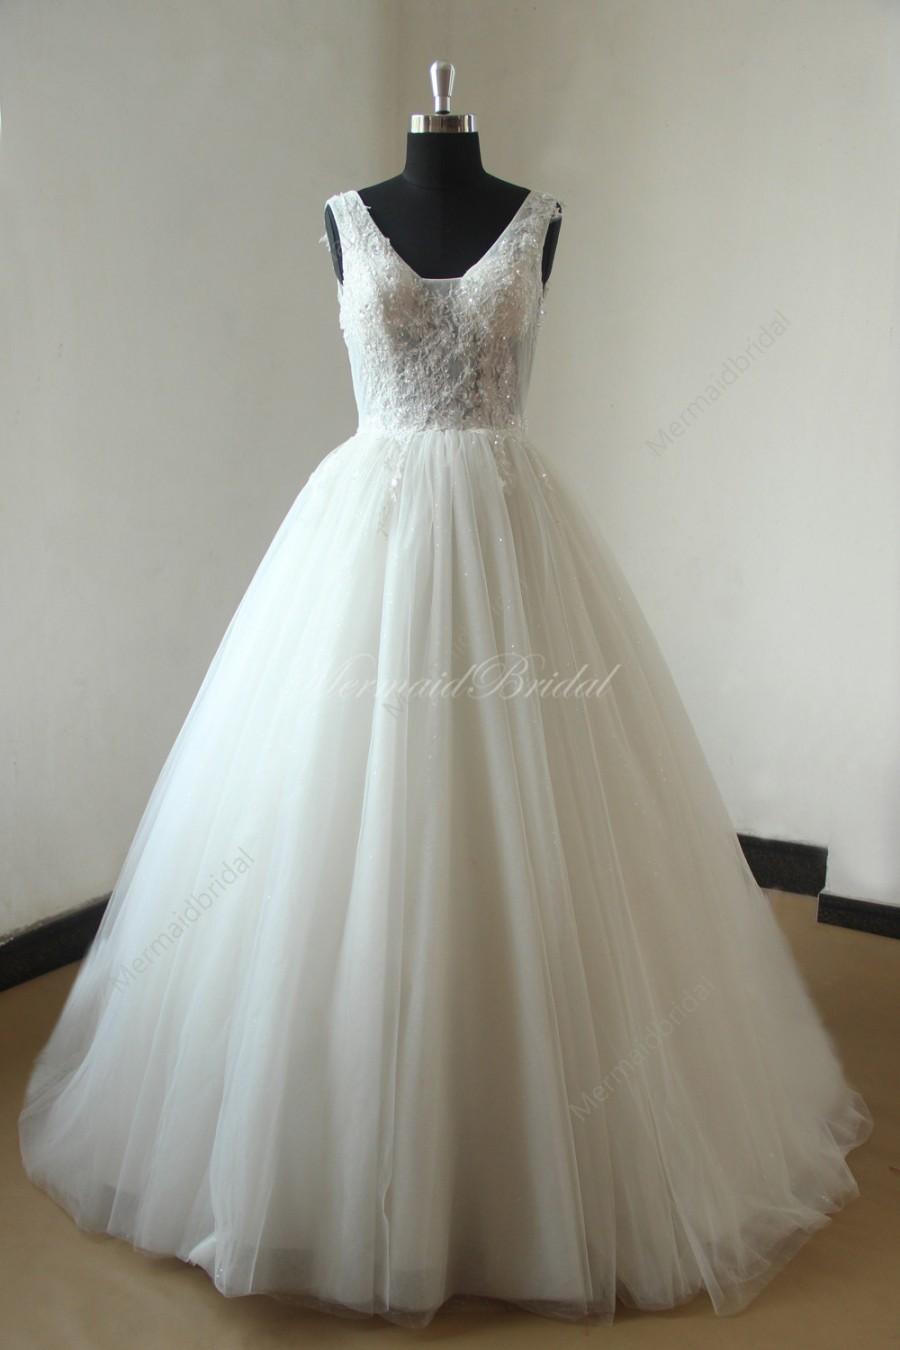 Wedding - Heavy beading ivory blingbling tulle ball gown lace wedding dress